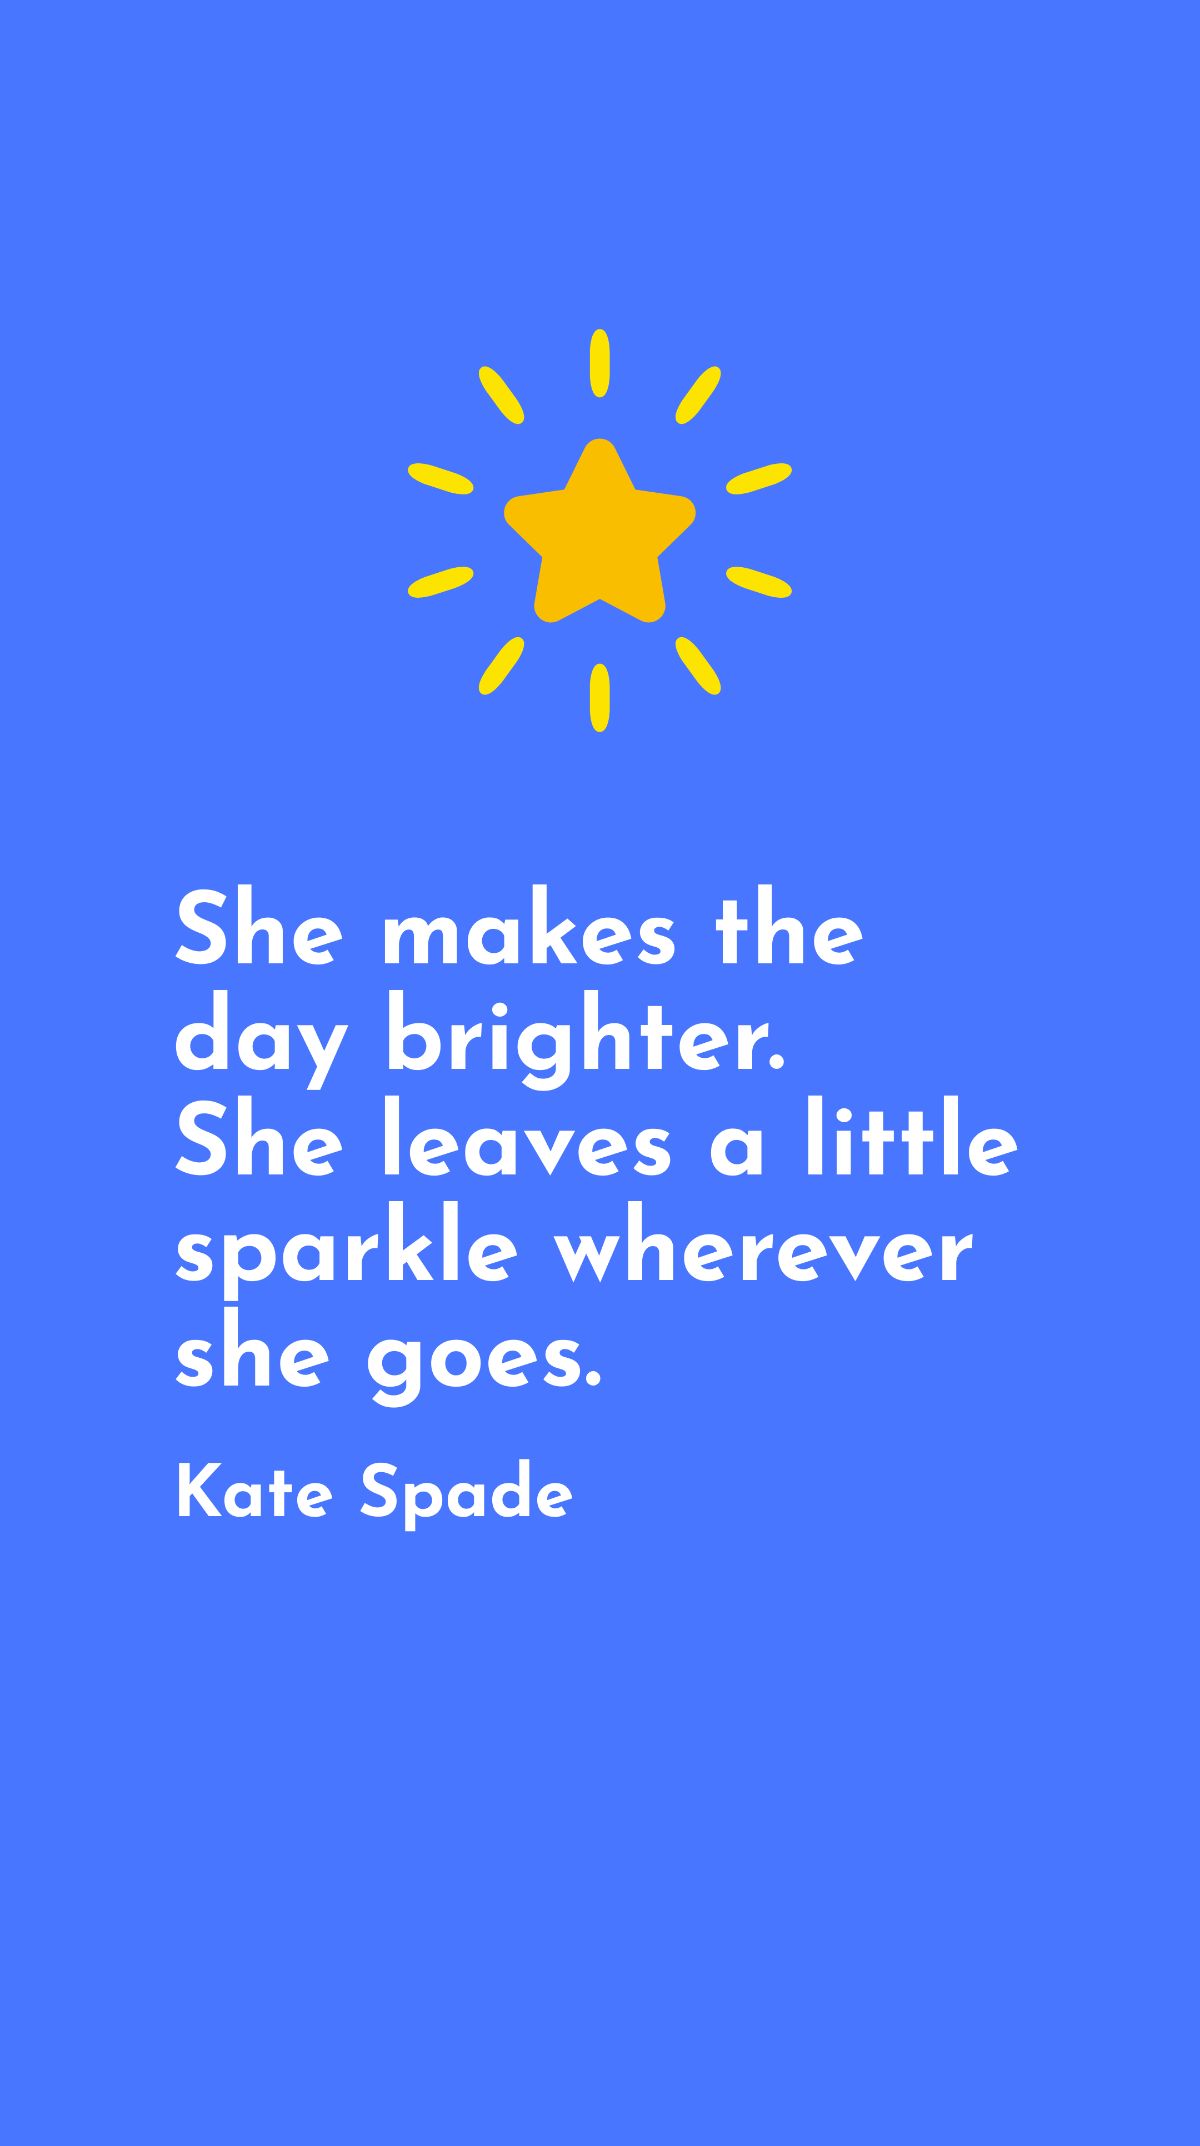 Kate Spade - She makes the day brighter. She leaves a little sparkle wherever she goes. Template